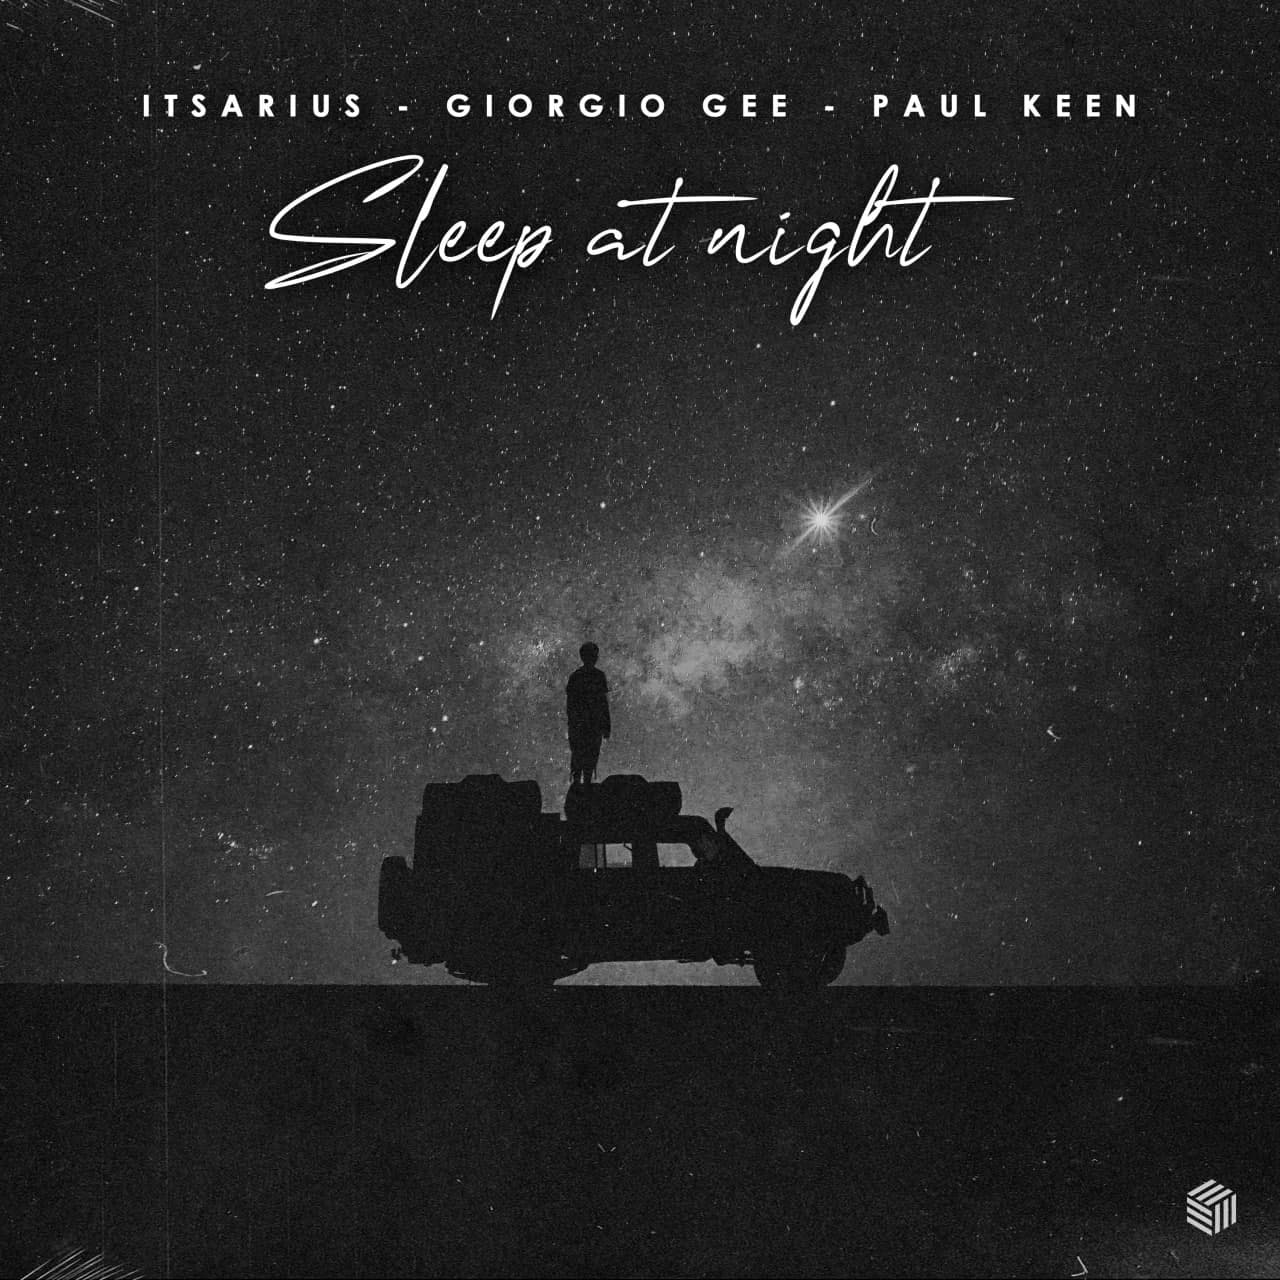 ItsArius & Giorgio Gee, Paul Keen - Sleep At Night (Extended Mix)